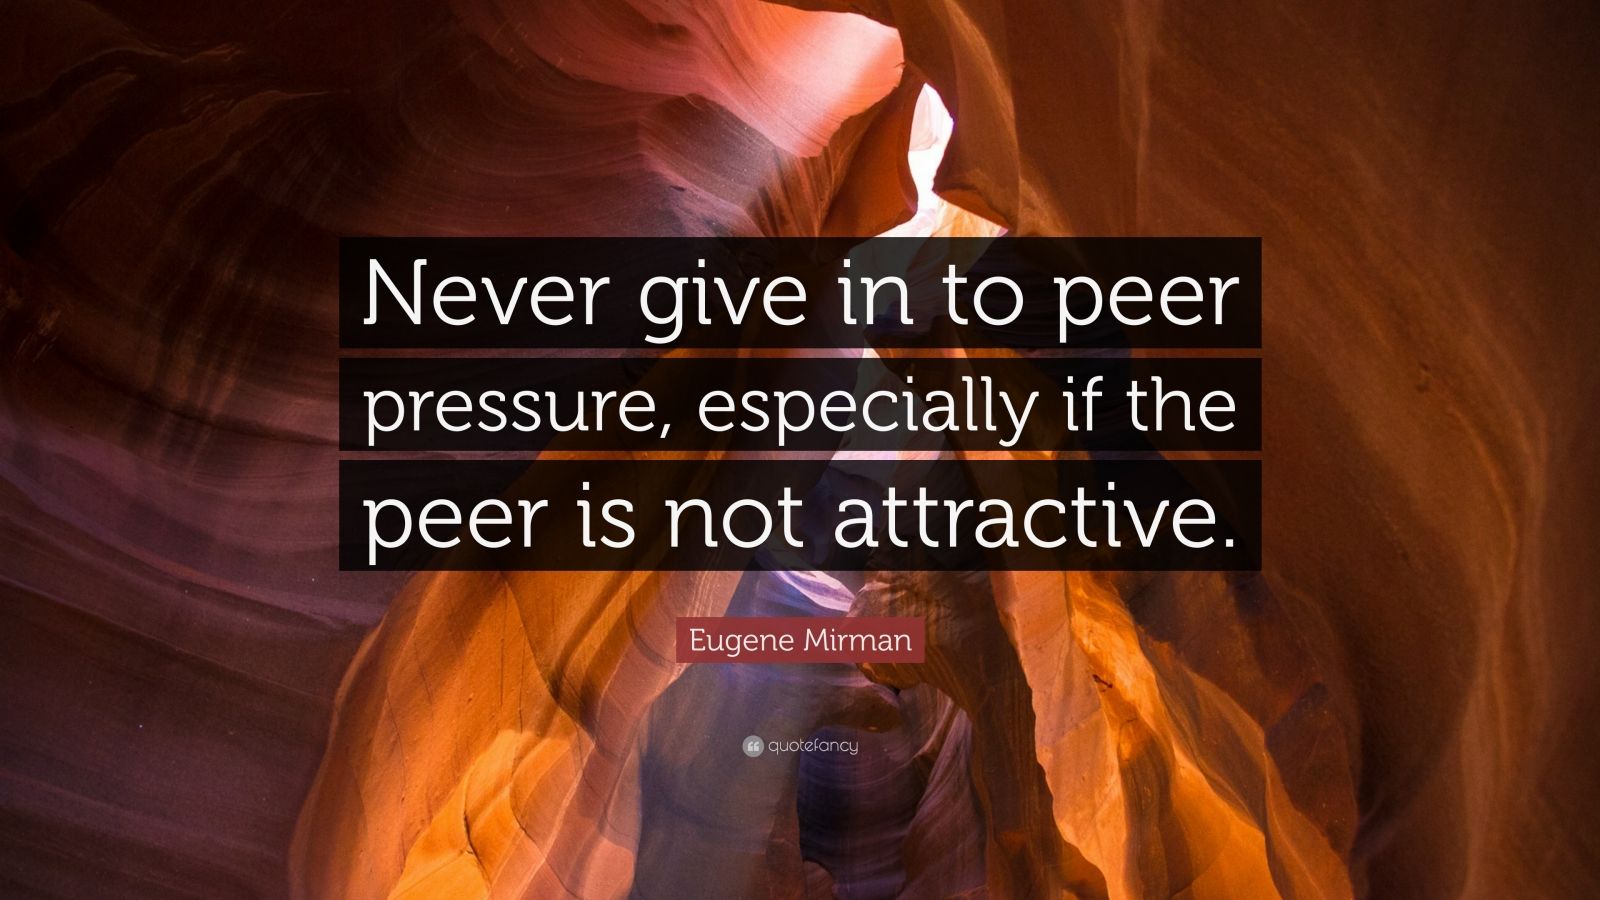 Eugene Mirman Quote “never Give In To Peer Pressure Especially If The Peer Is Not Attractive” 5753